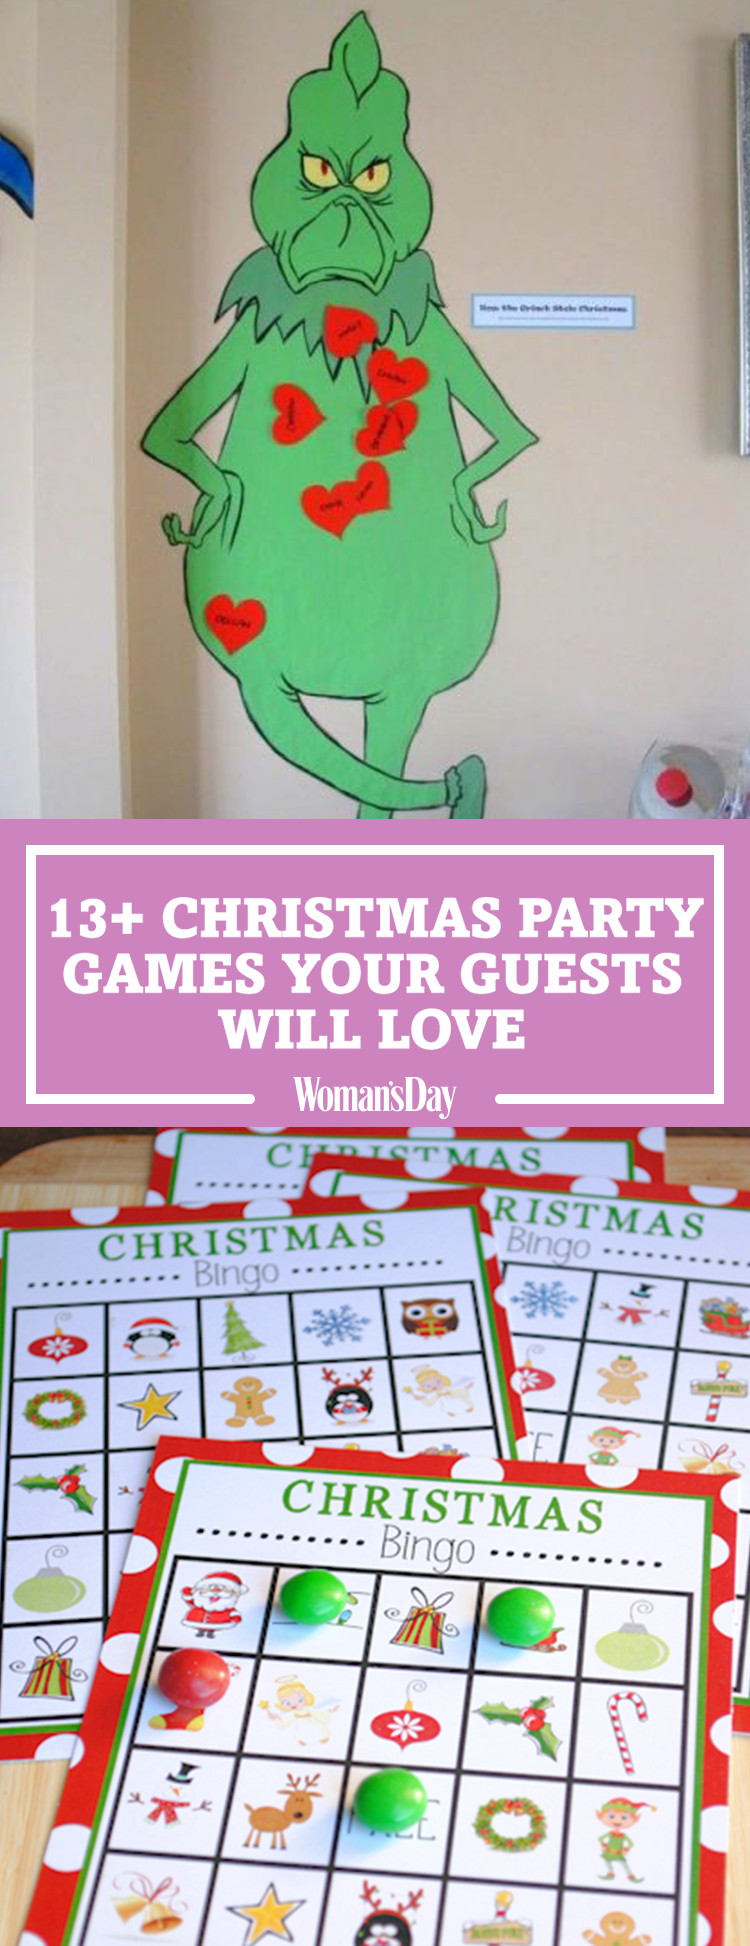 Christmas Party Activity Ideas
 17 Fun Christmas Party Games for Kids DIY Holiday Party